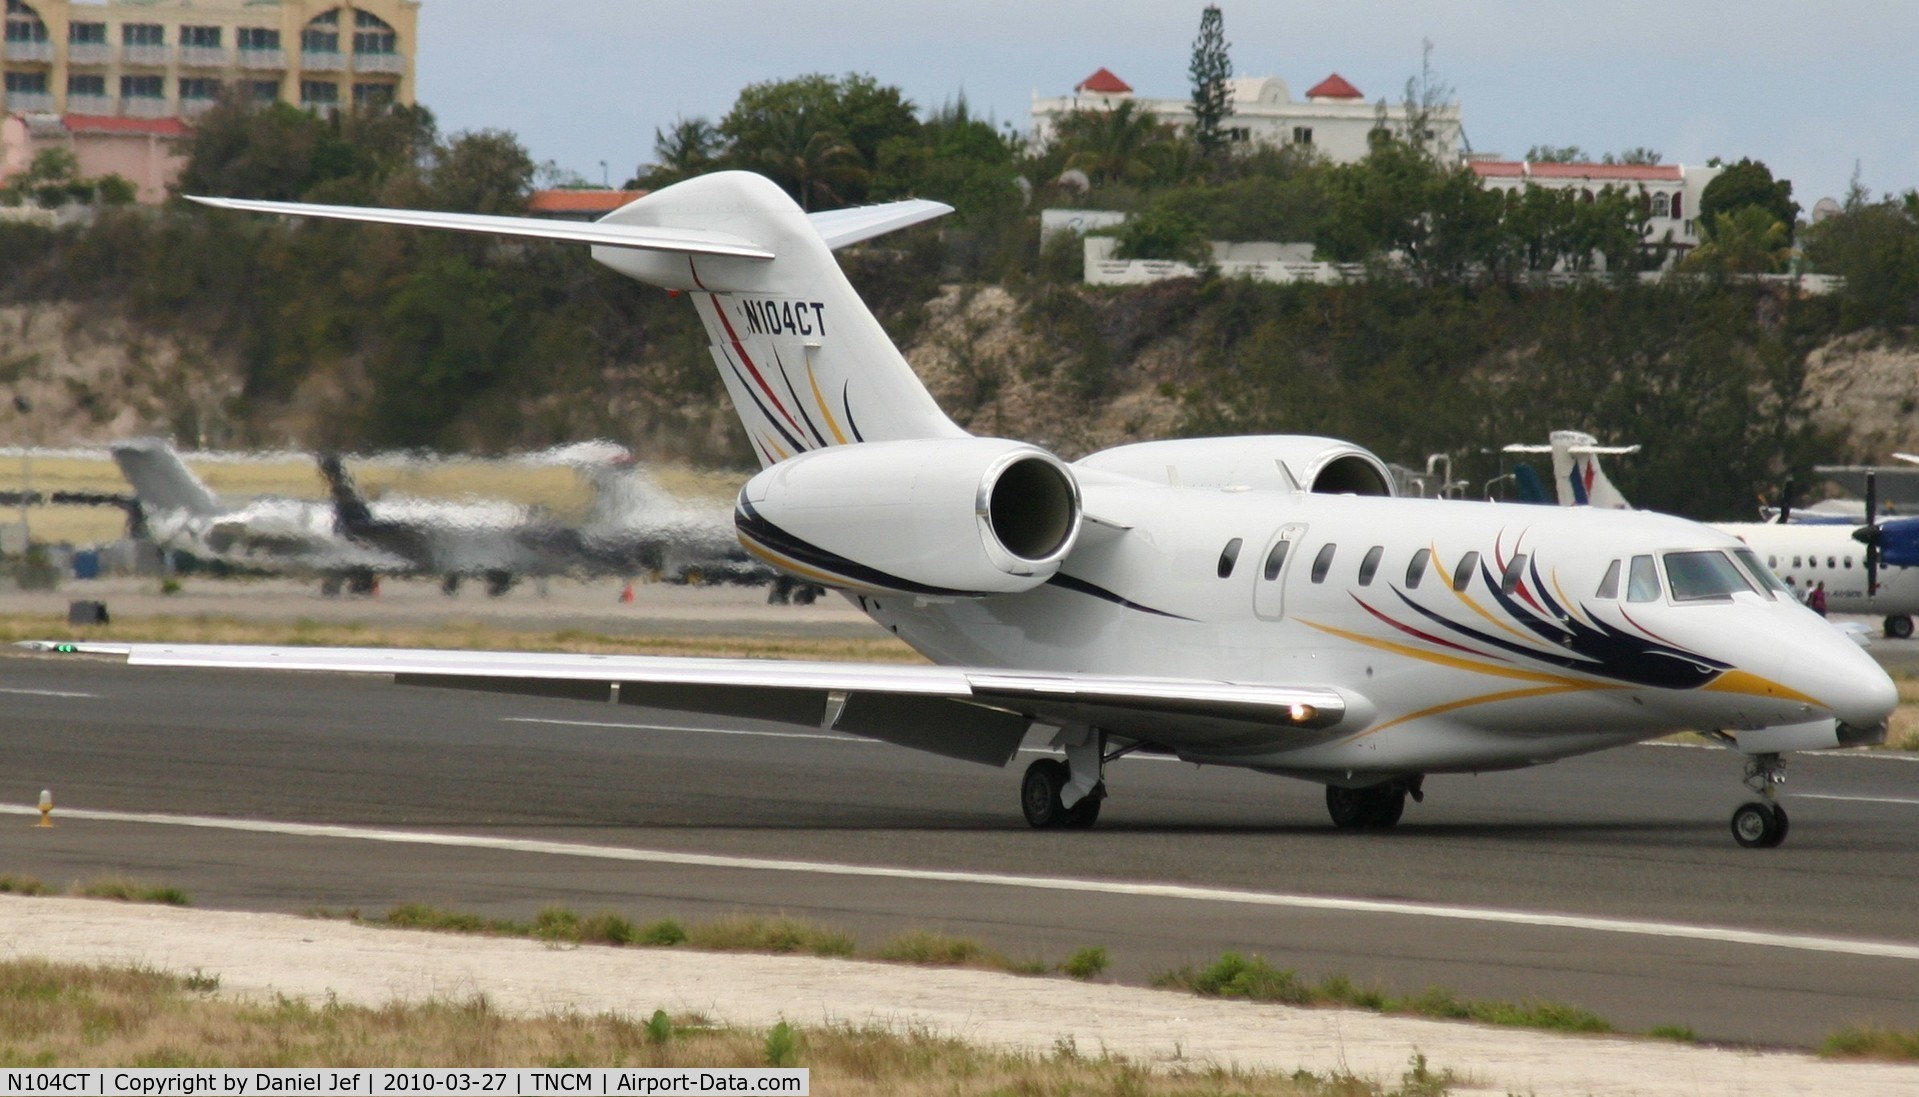 N104CT, 2007 Cessna 750 Citation X Citation X C/N 750-0275, N104CT prepping to back track the active for parking